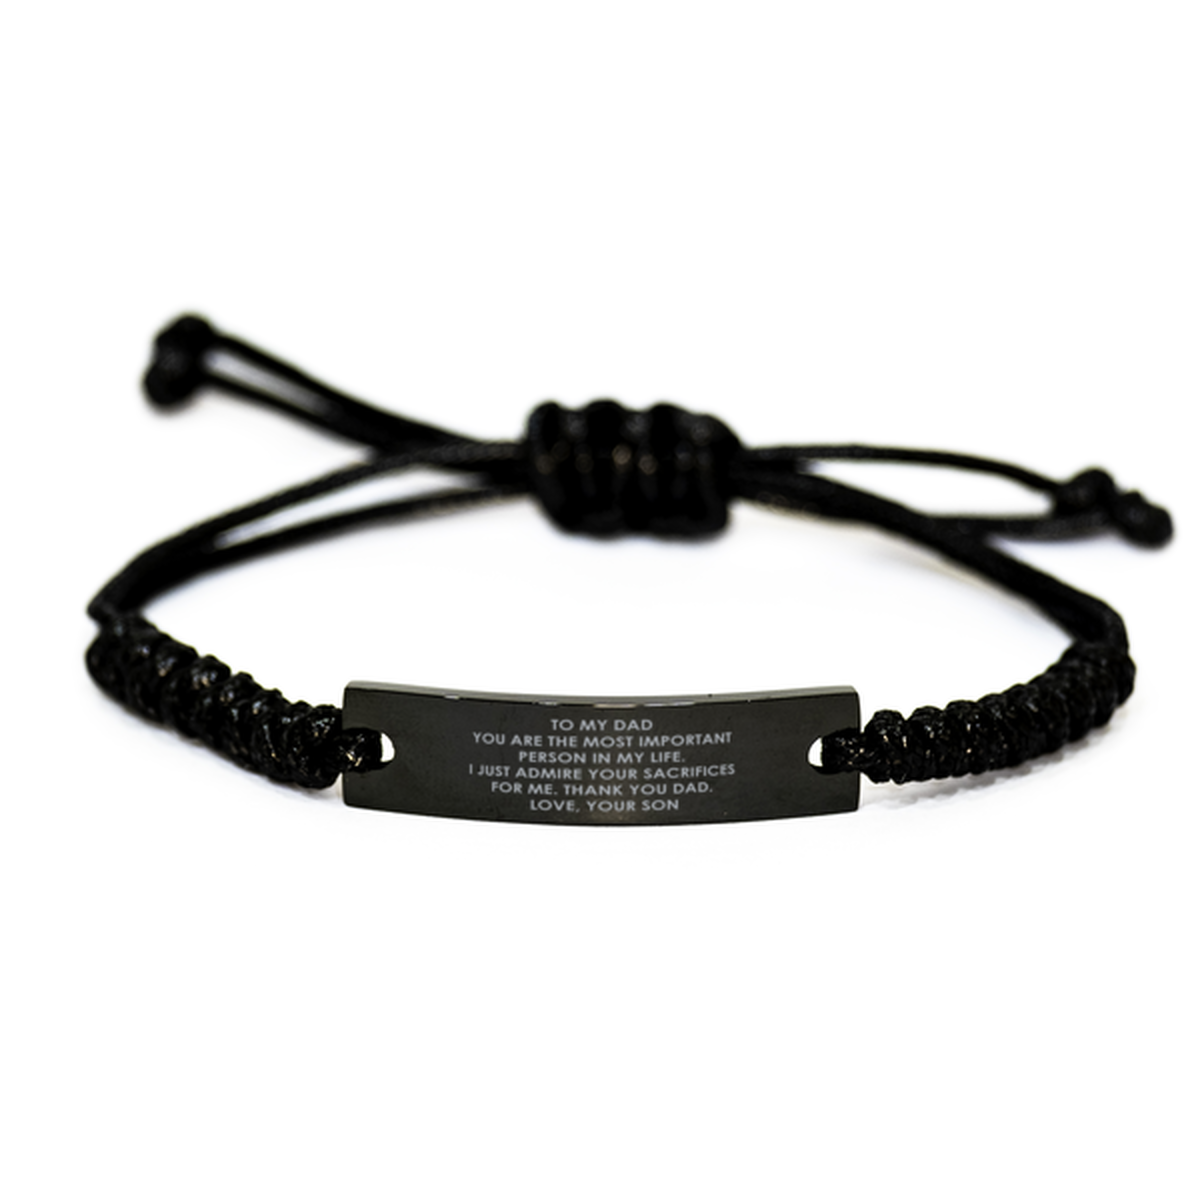 To My Dad Rope Bracelet, You Are The Most Important Person, Fathers Day Gifts For Dad From Son, Birthday Gifts For Men